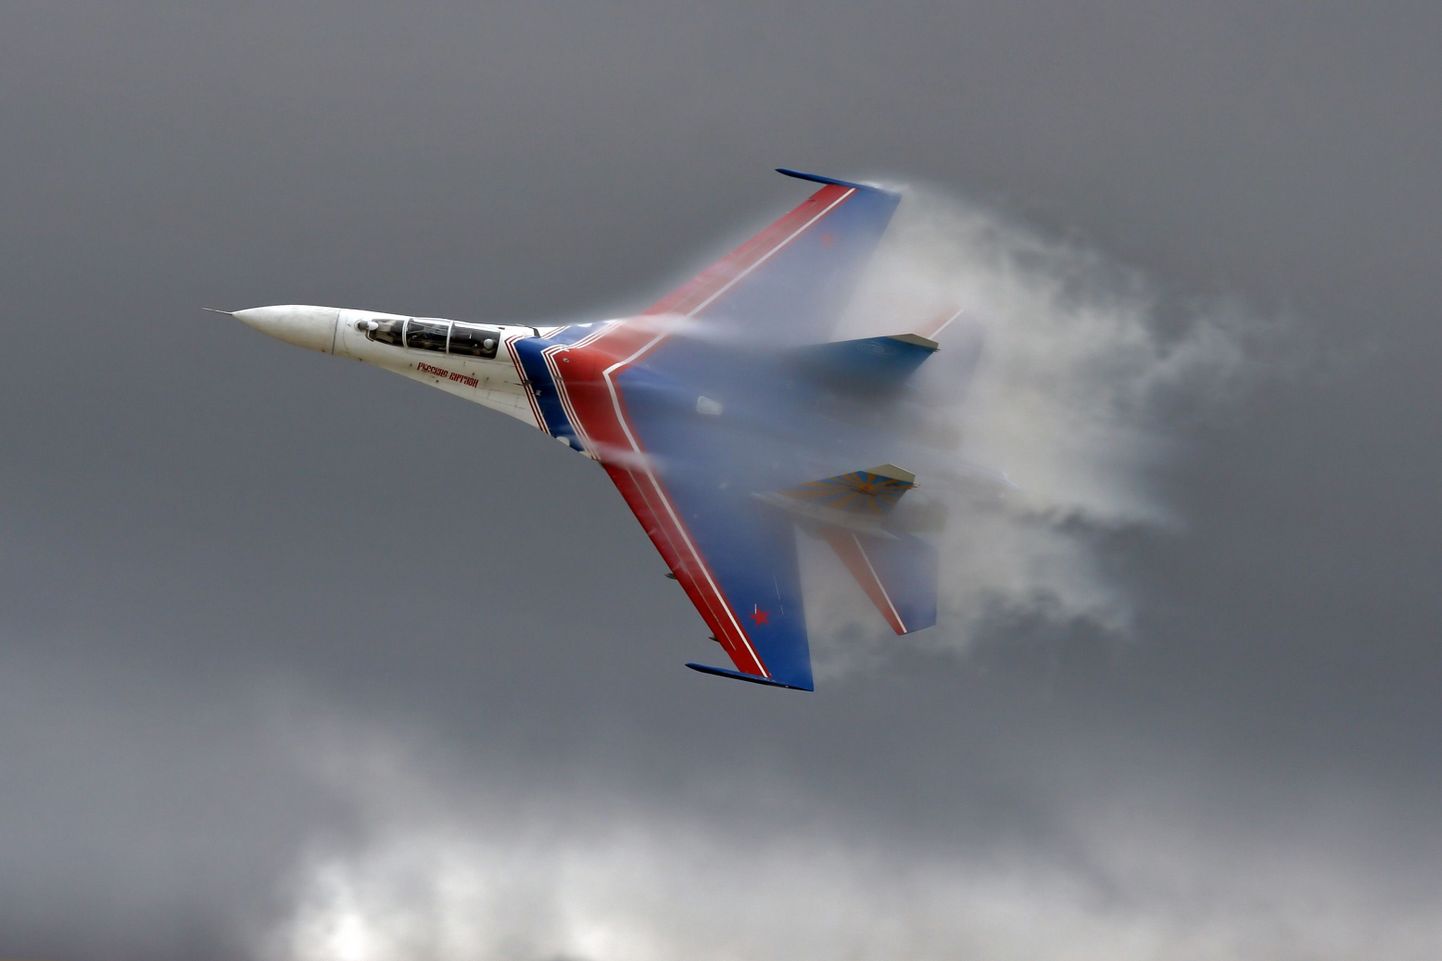 ITAR-TASS 01: MOSCOW REGION, RUSSIA. AUGUST 5. A Sukhoi Su-27 flanker from the Russian Knights aerobatic demonstration team of the Russian Air Force performs aerial maneuvers during the air show at the Kubinka Air Force base. (Photo ITAR-TASS / Marina Lystseva)